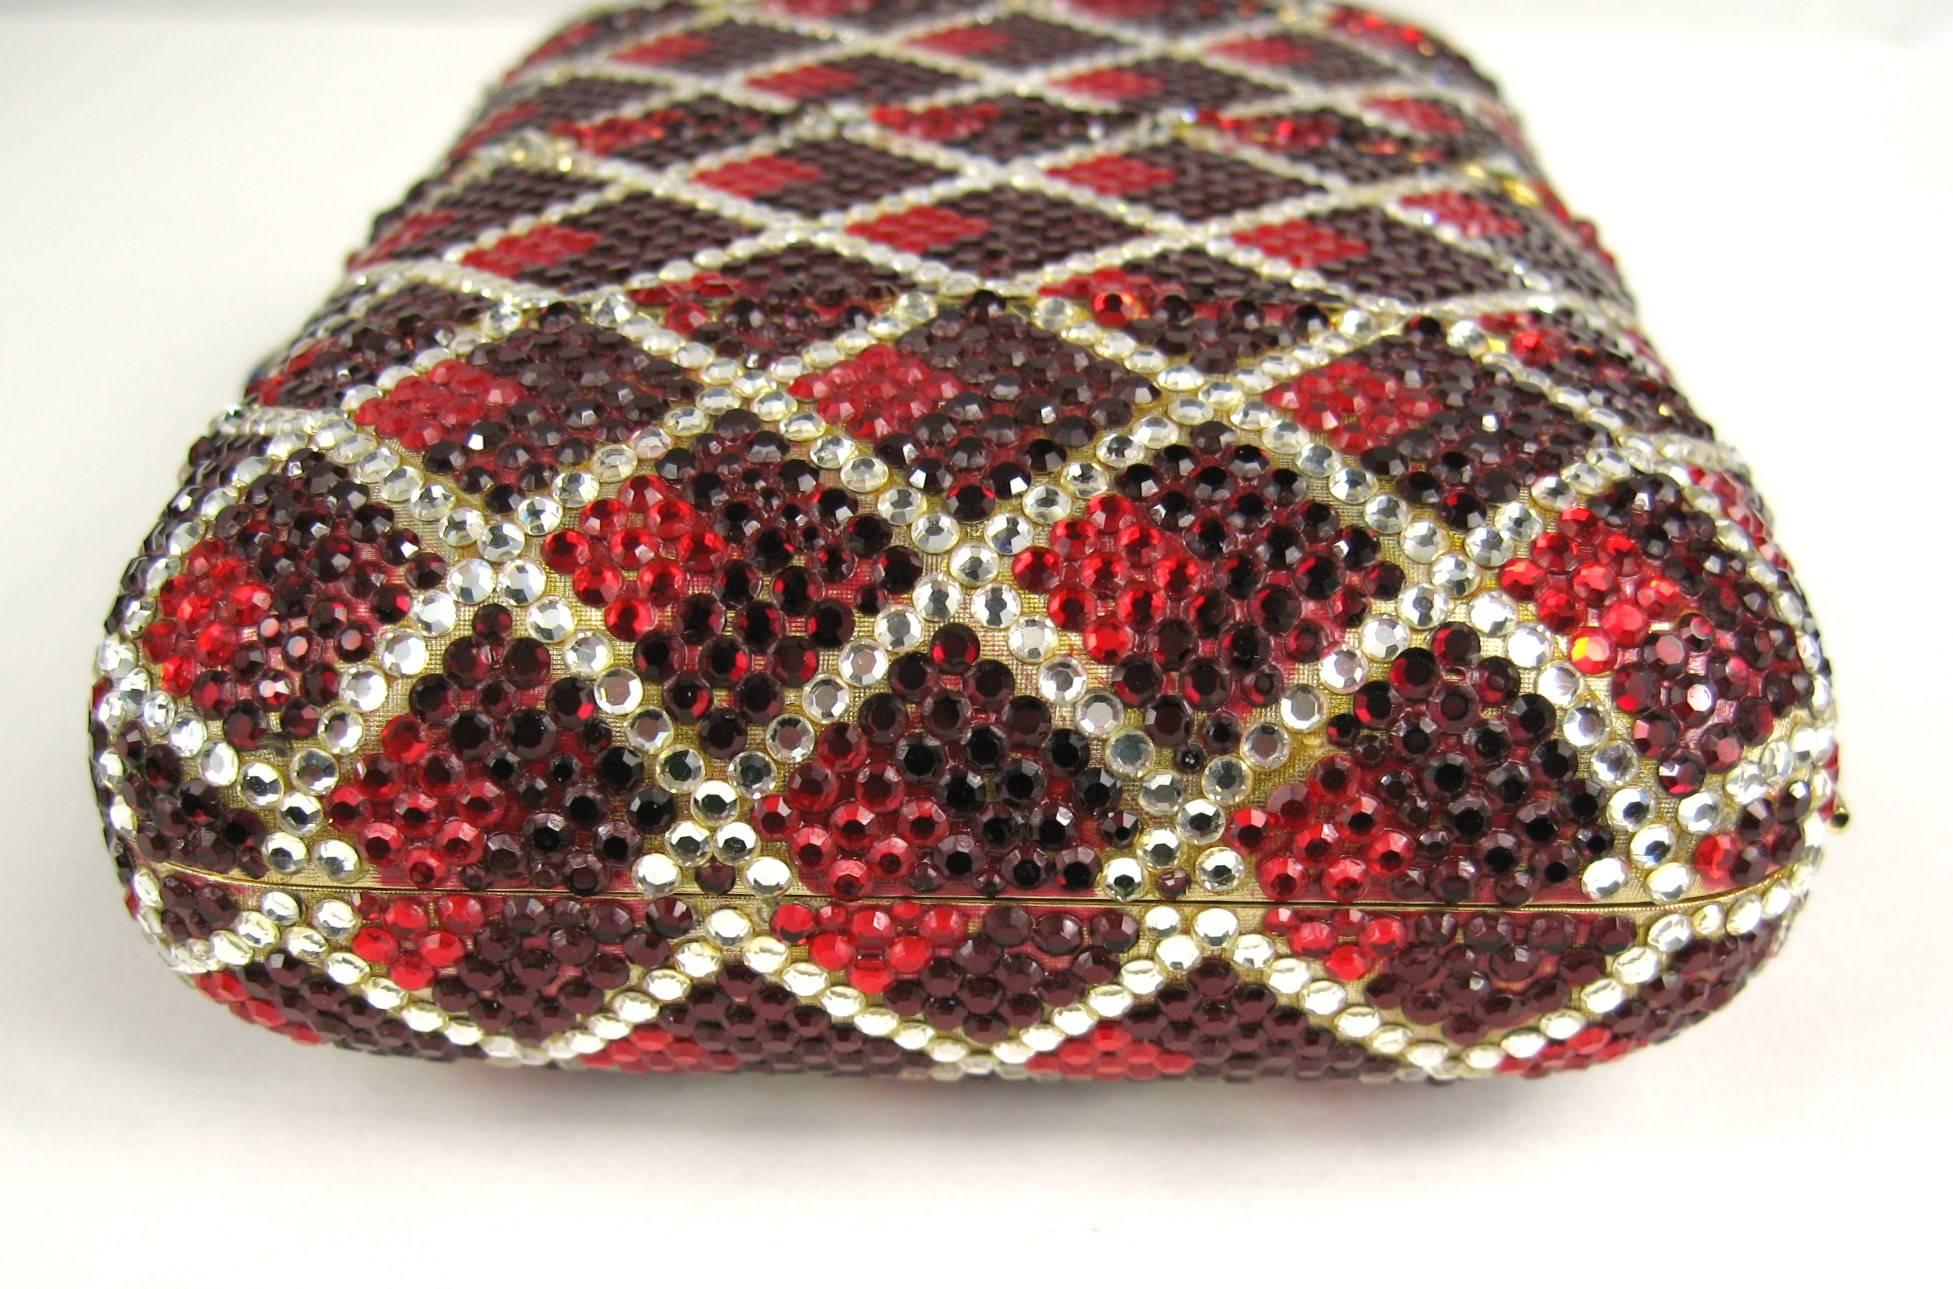 Judith Leiber Red Swarovski Crystal Minaudiere Evening Bag Clutch Holiday Runway In Good Condition For Sale In Wallkill, NY